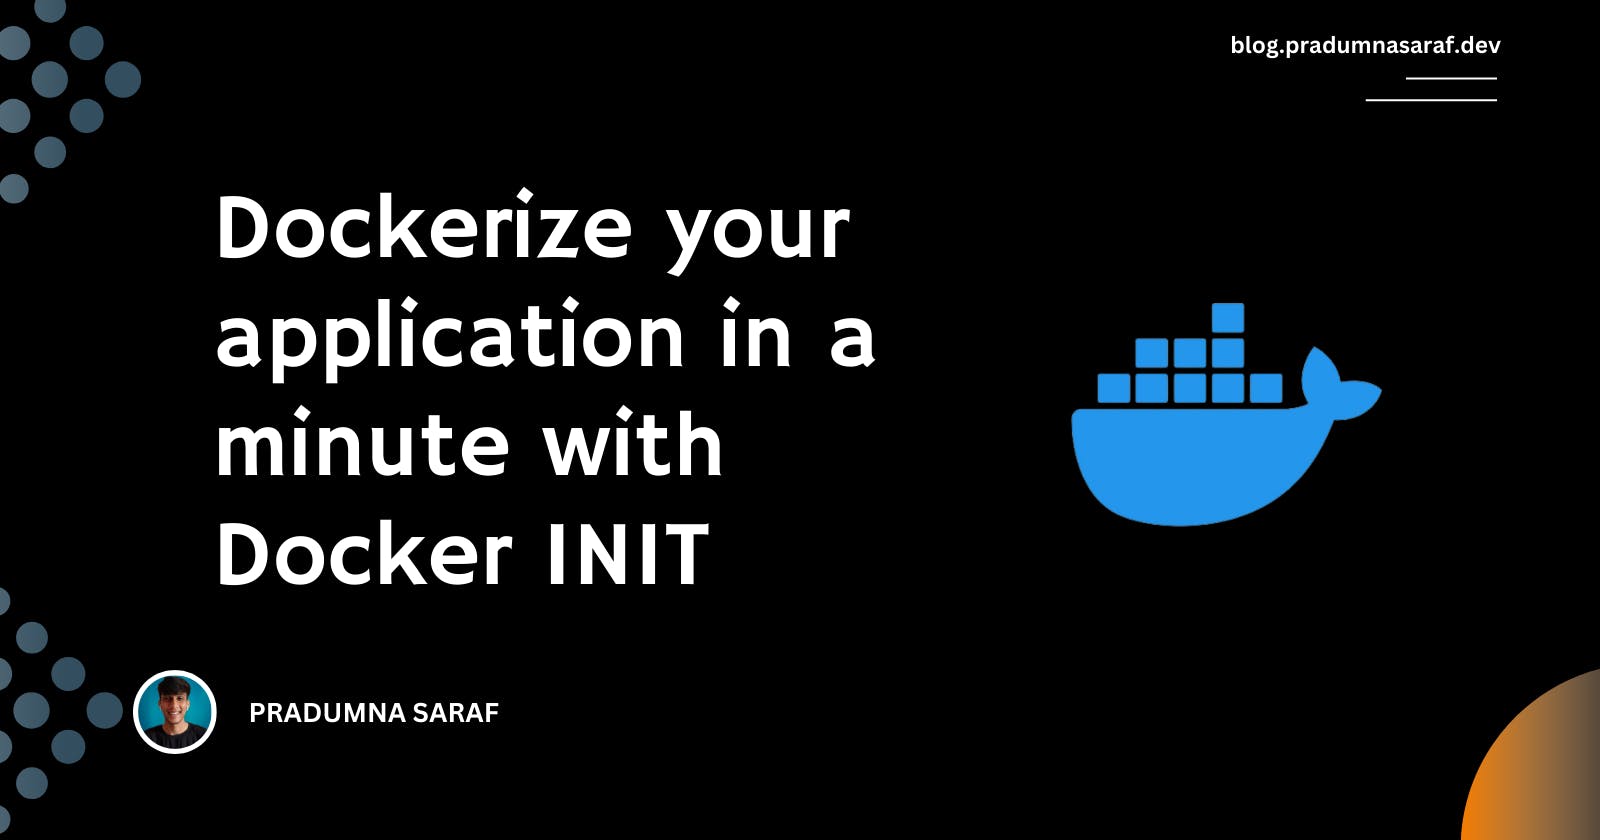 Dockerize your application in a minute with Docker INIT